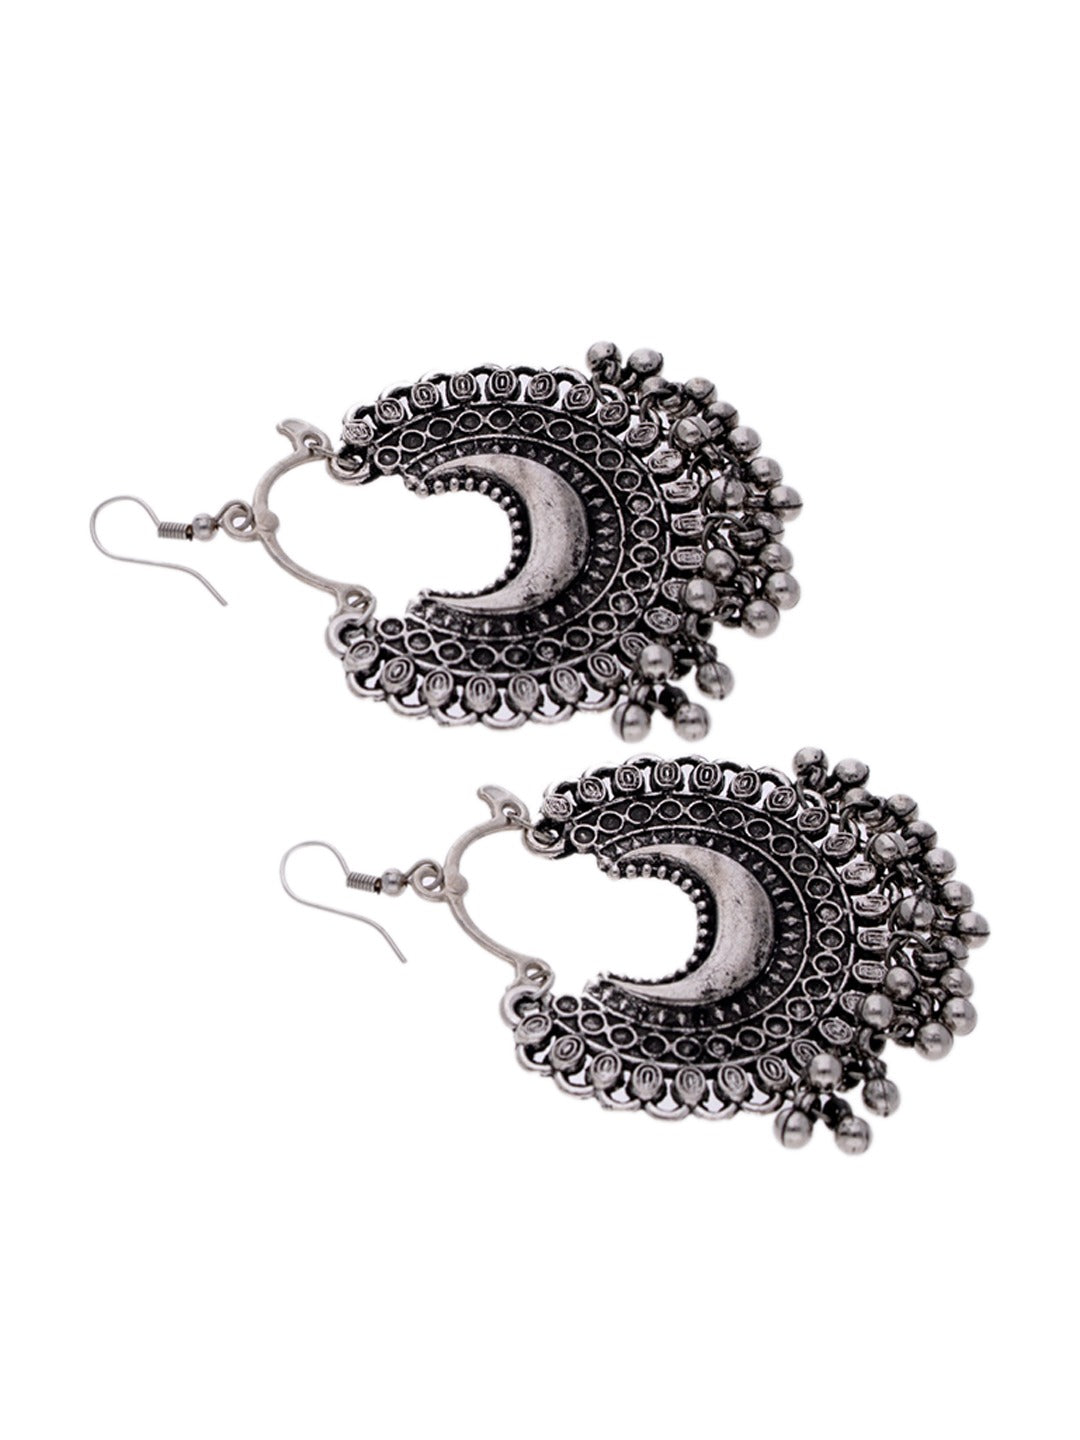 Women's Silver-Plated Contemporary Chandbalis Earrings - Morkanth